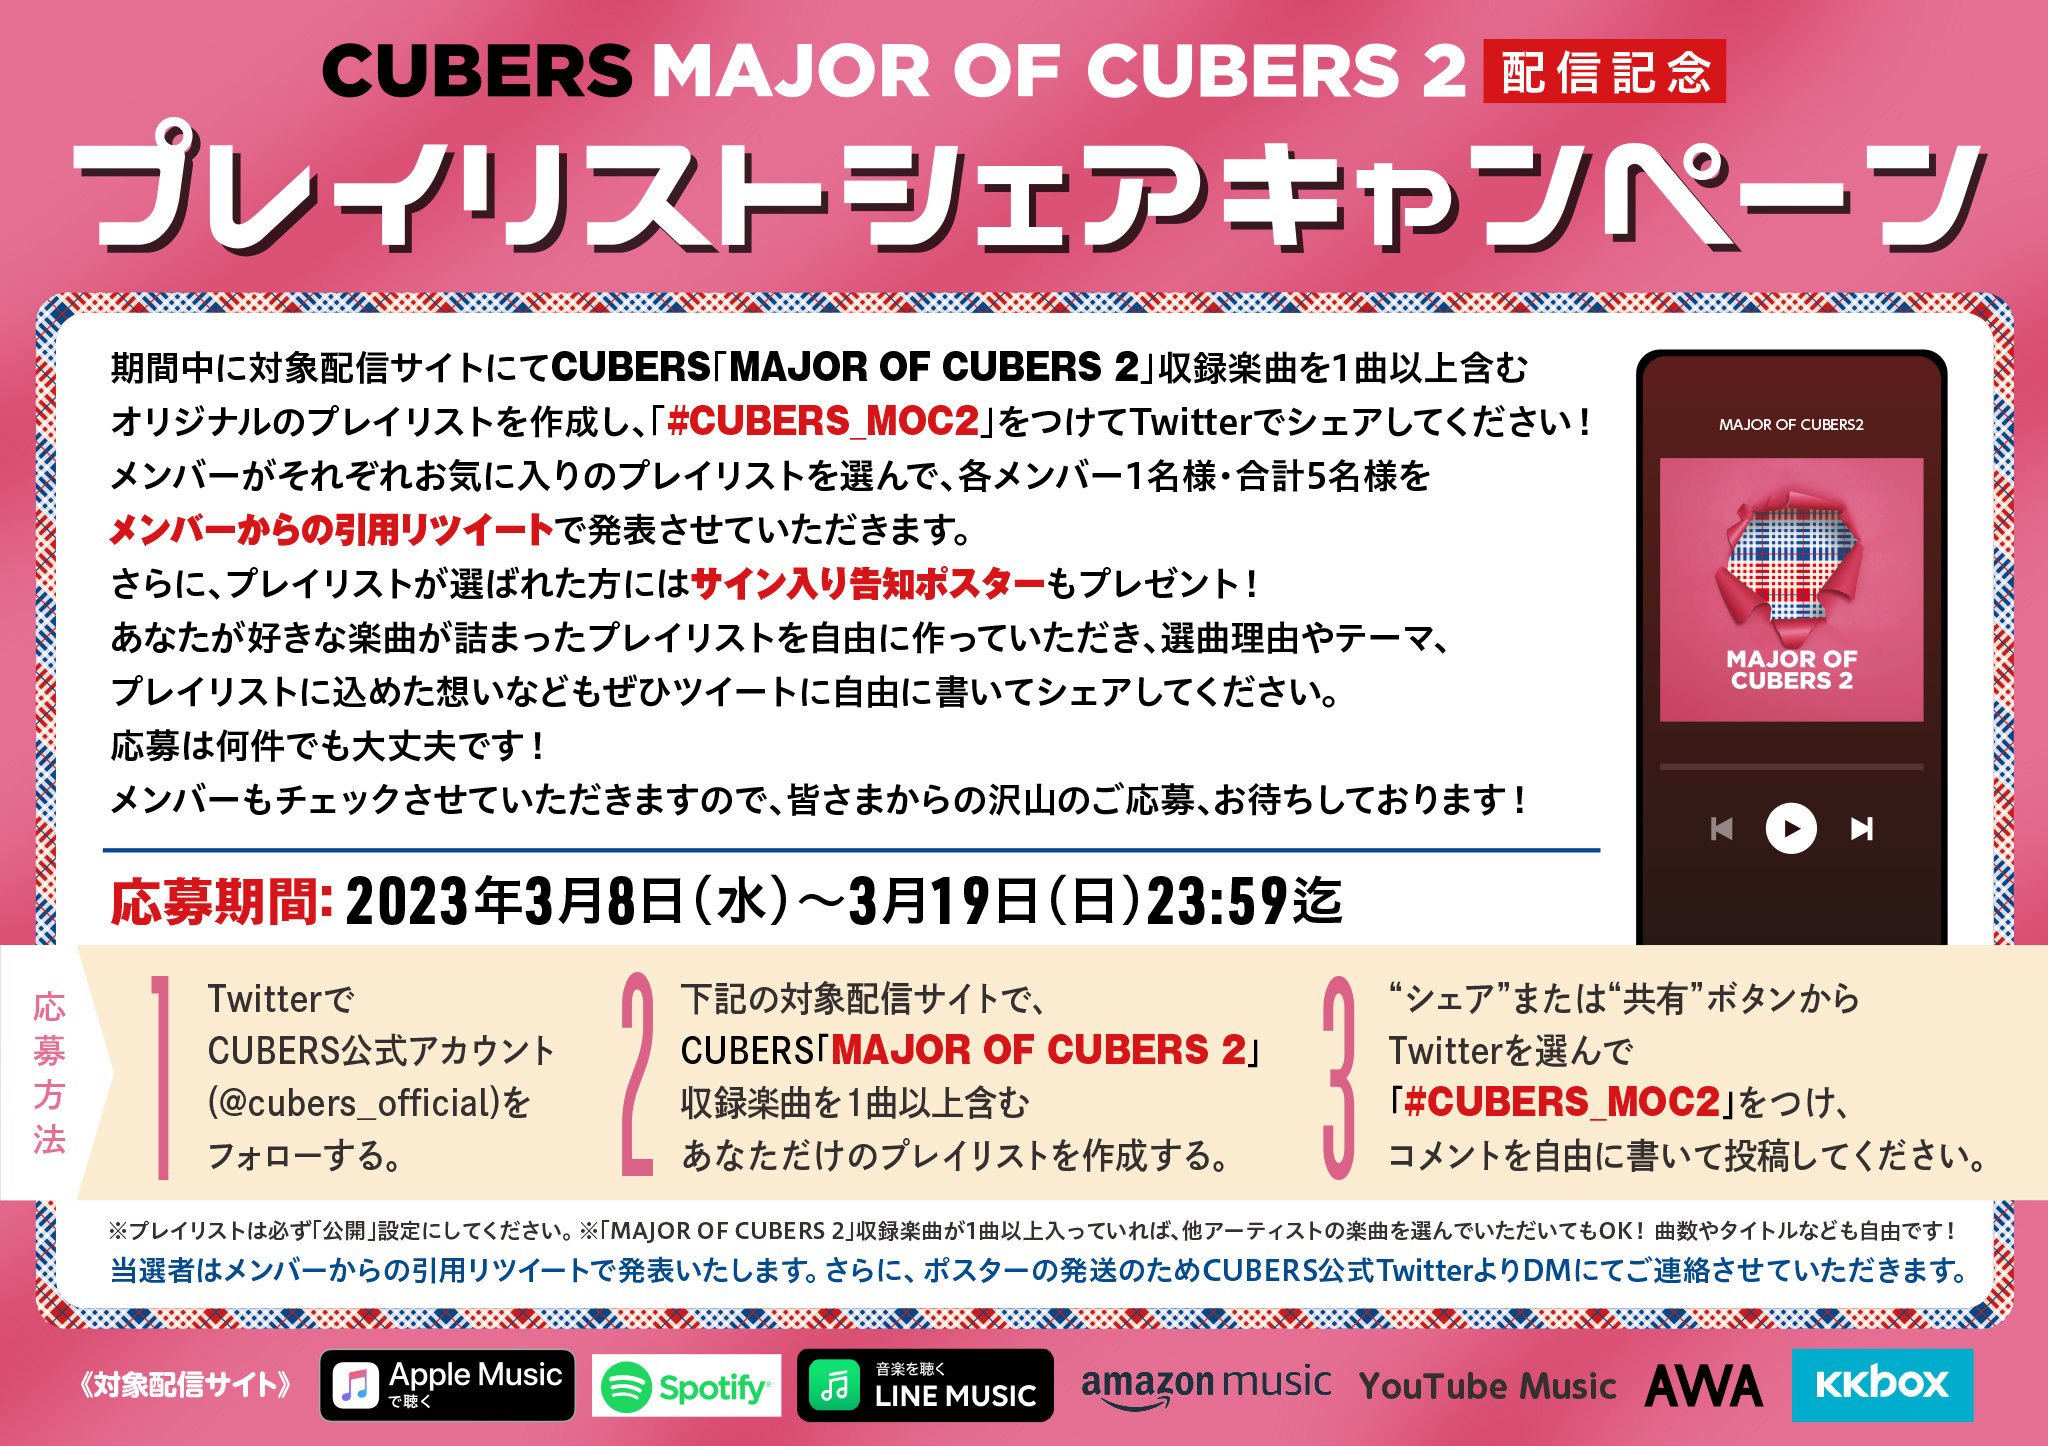 【NEWS】2nd Album「MAJOR OF CUBERS 2」配信記念プレイリストシェアキャンペーン実施決定！